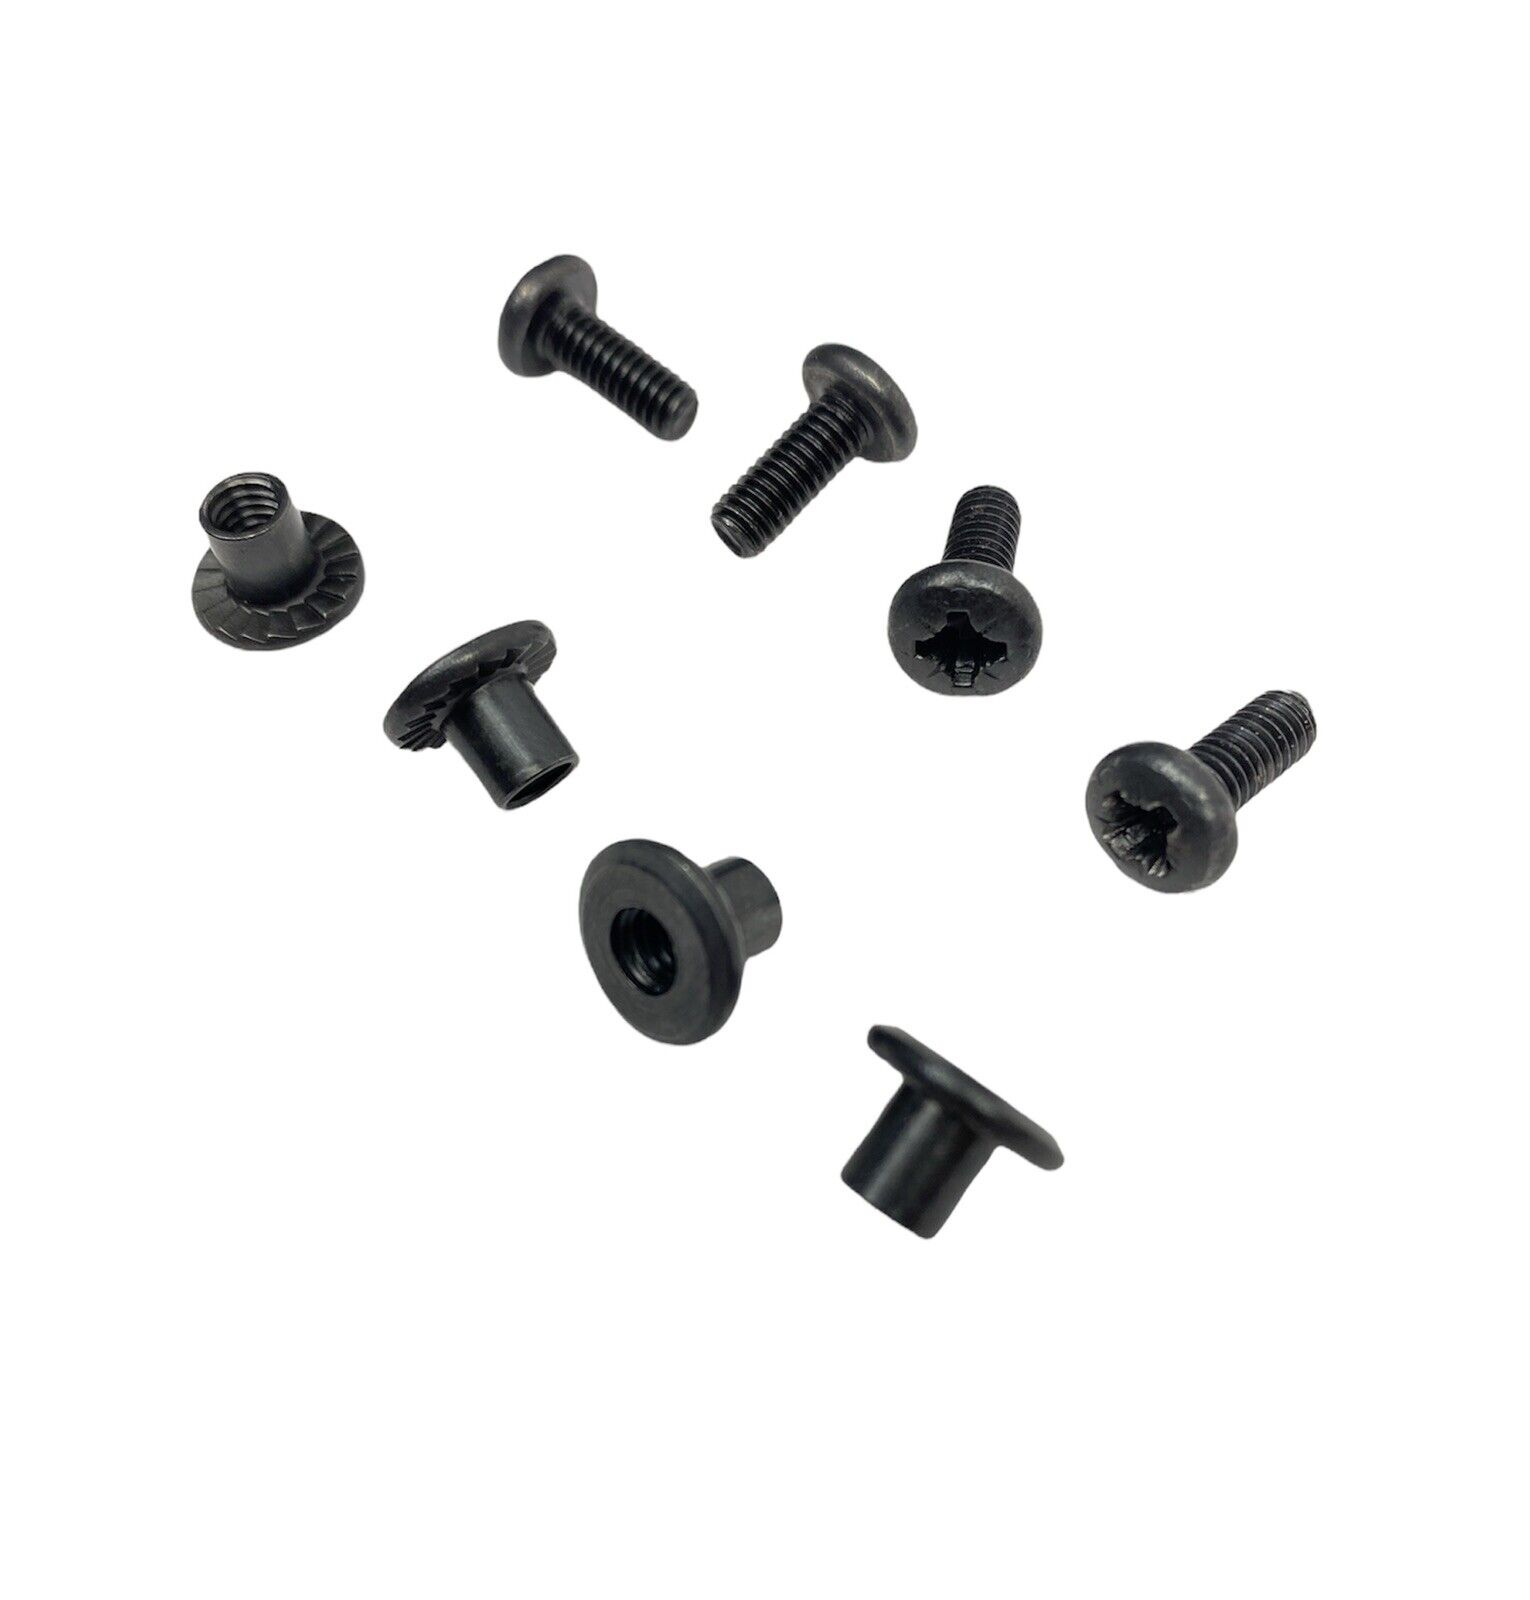 4pk NVG Mount Screw & Nut For ACH MICH LWH PASGT Combat Helmet Night Vision New